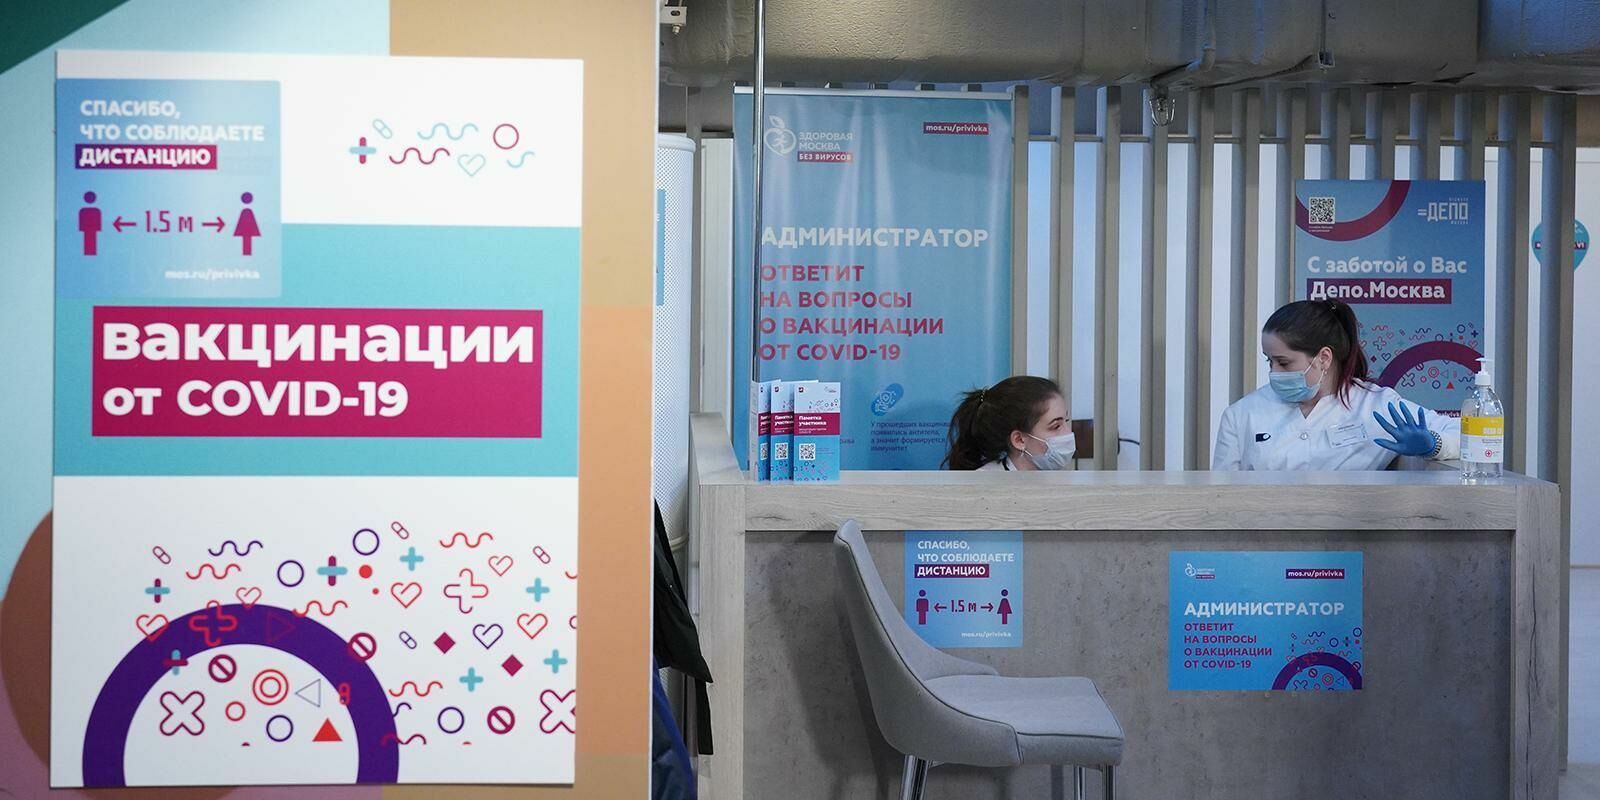 Ten apartments will be raffled off among Muscovites vaccinated against covid